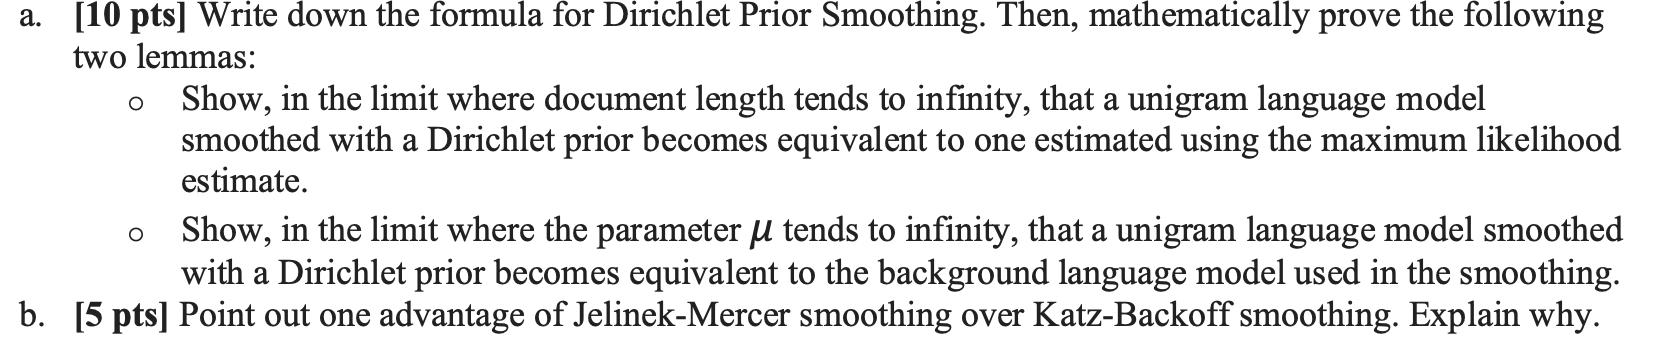 a. [10 pts] Write down the formula for Dirichlet Prior Smoothing. Then, mathematically prove the following